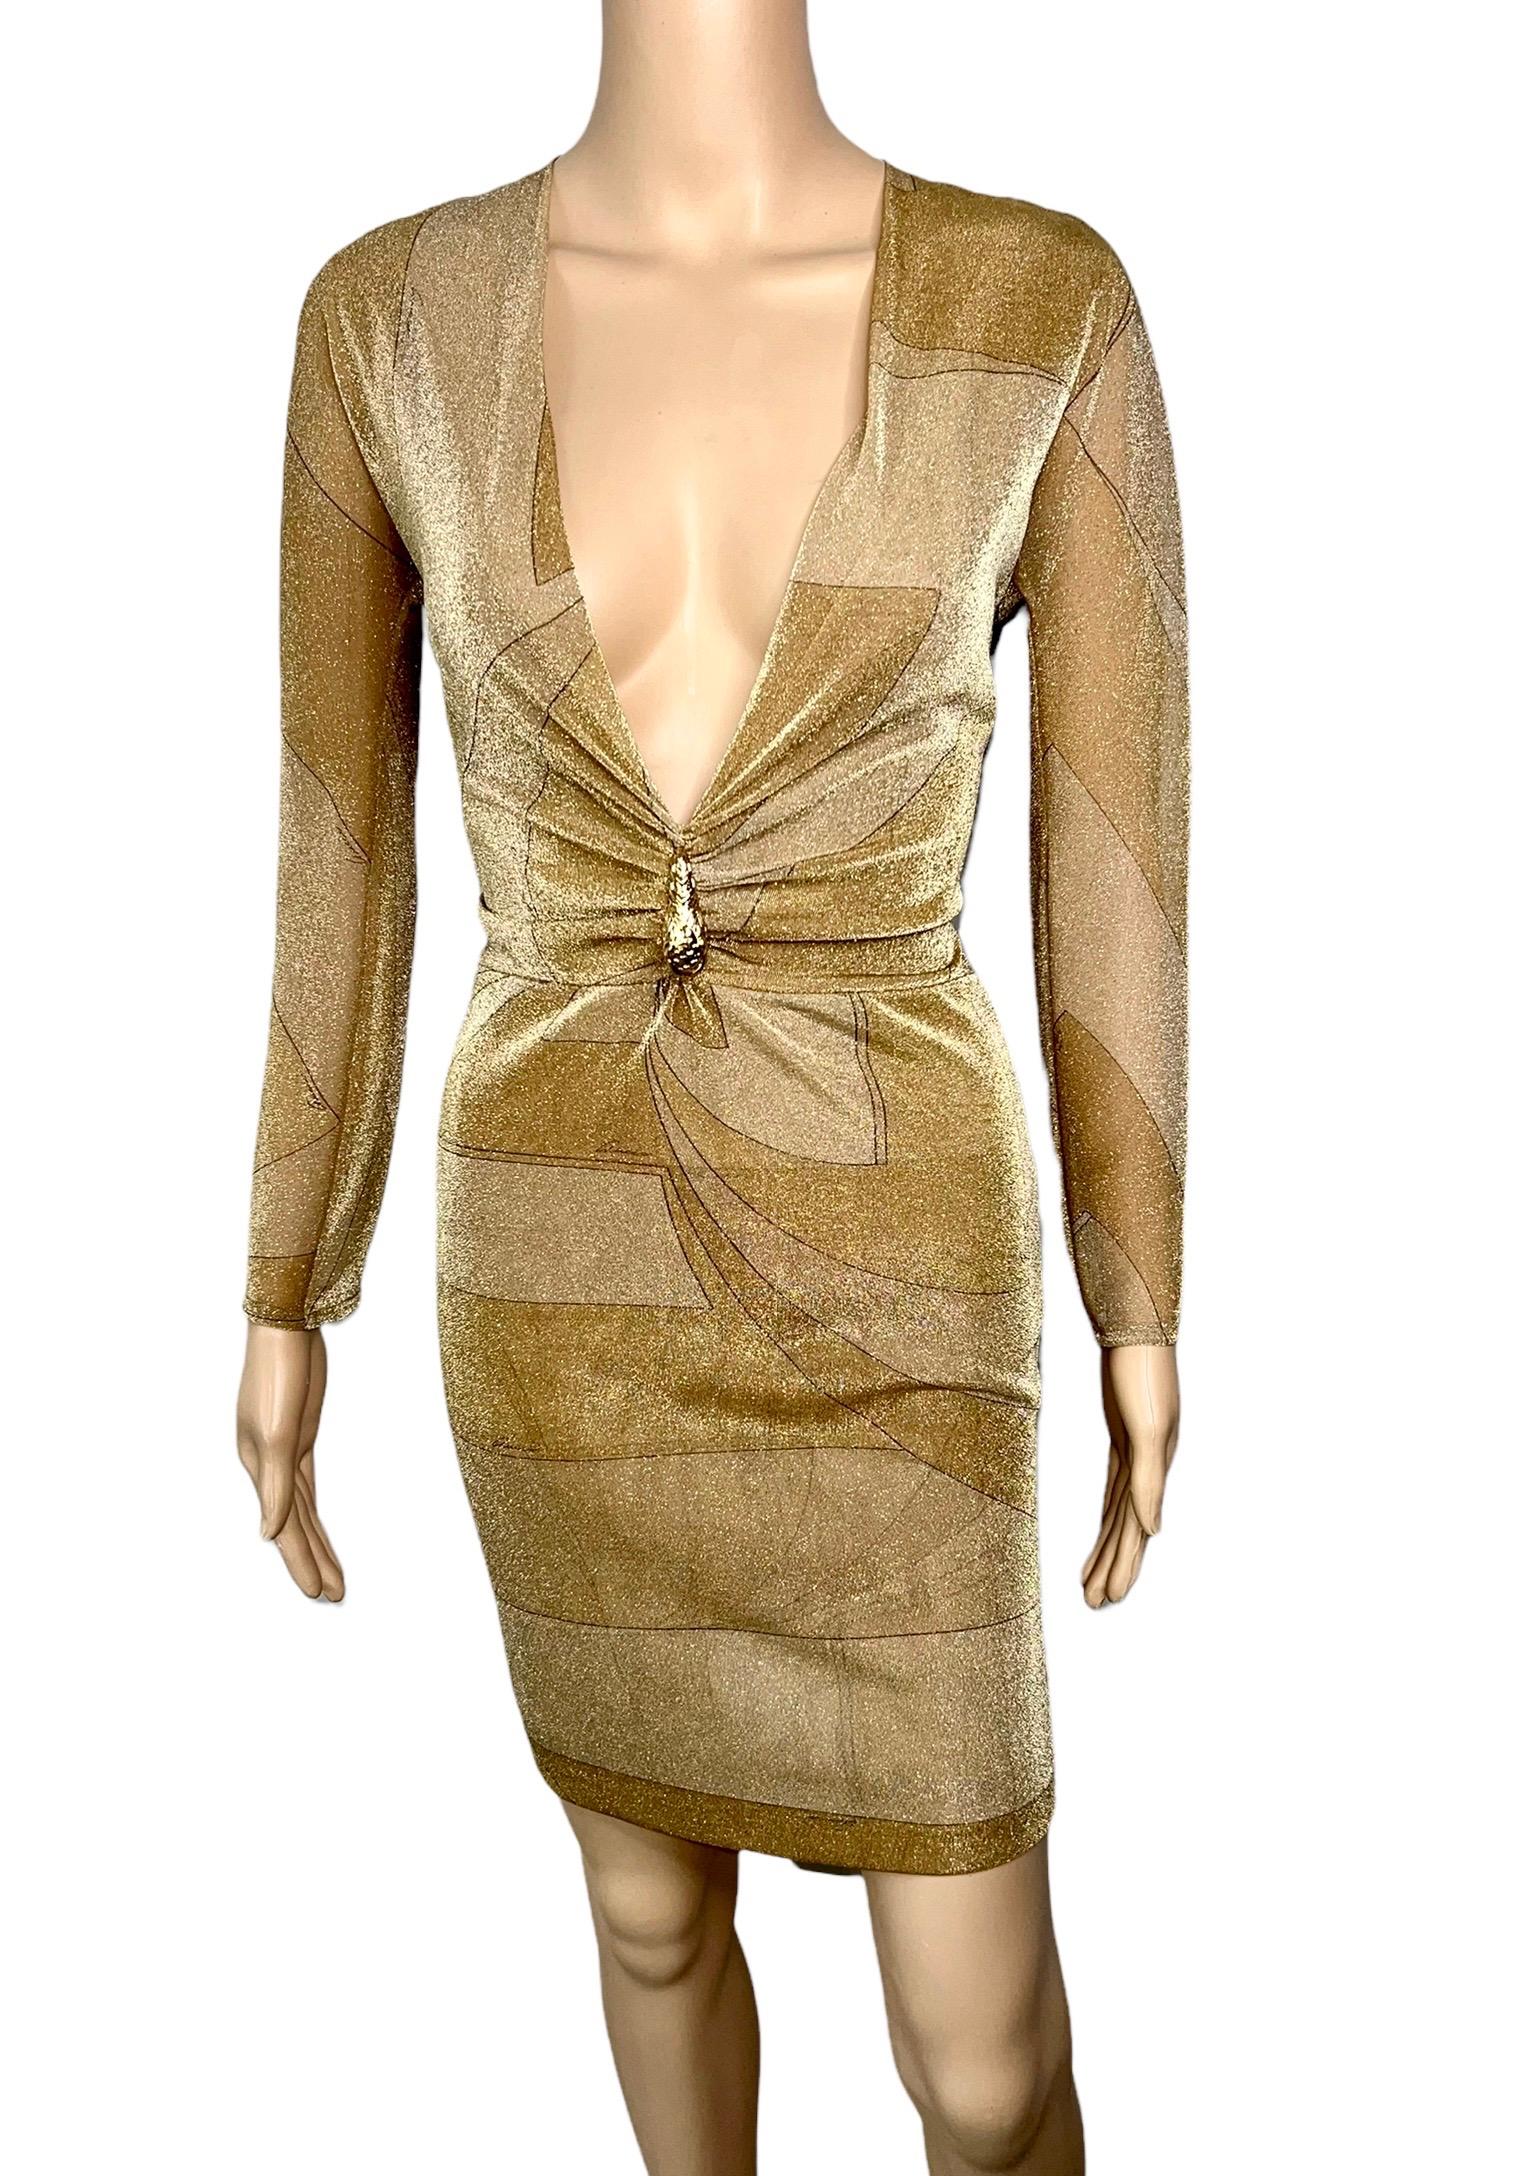 Tom Ford for Gucci F/W 2000 Runway Plunged Neckline Metallic Knit Mini Dress In Excellent Condition For Sale In Naples, FL